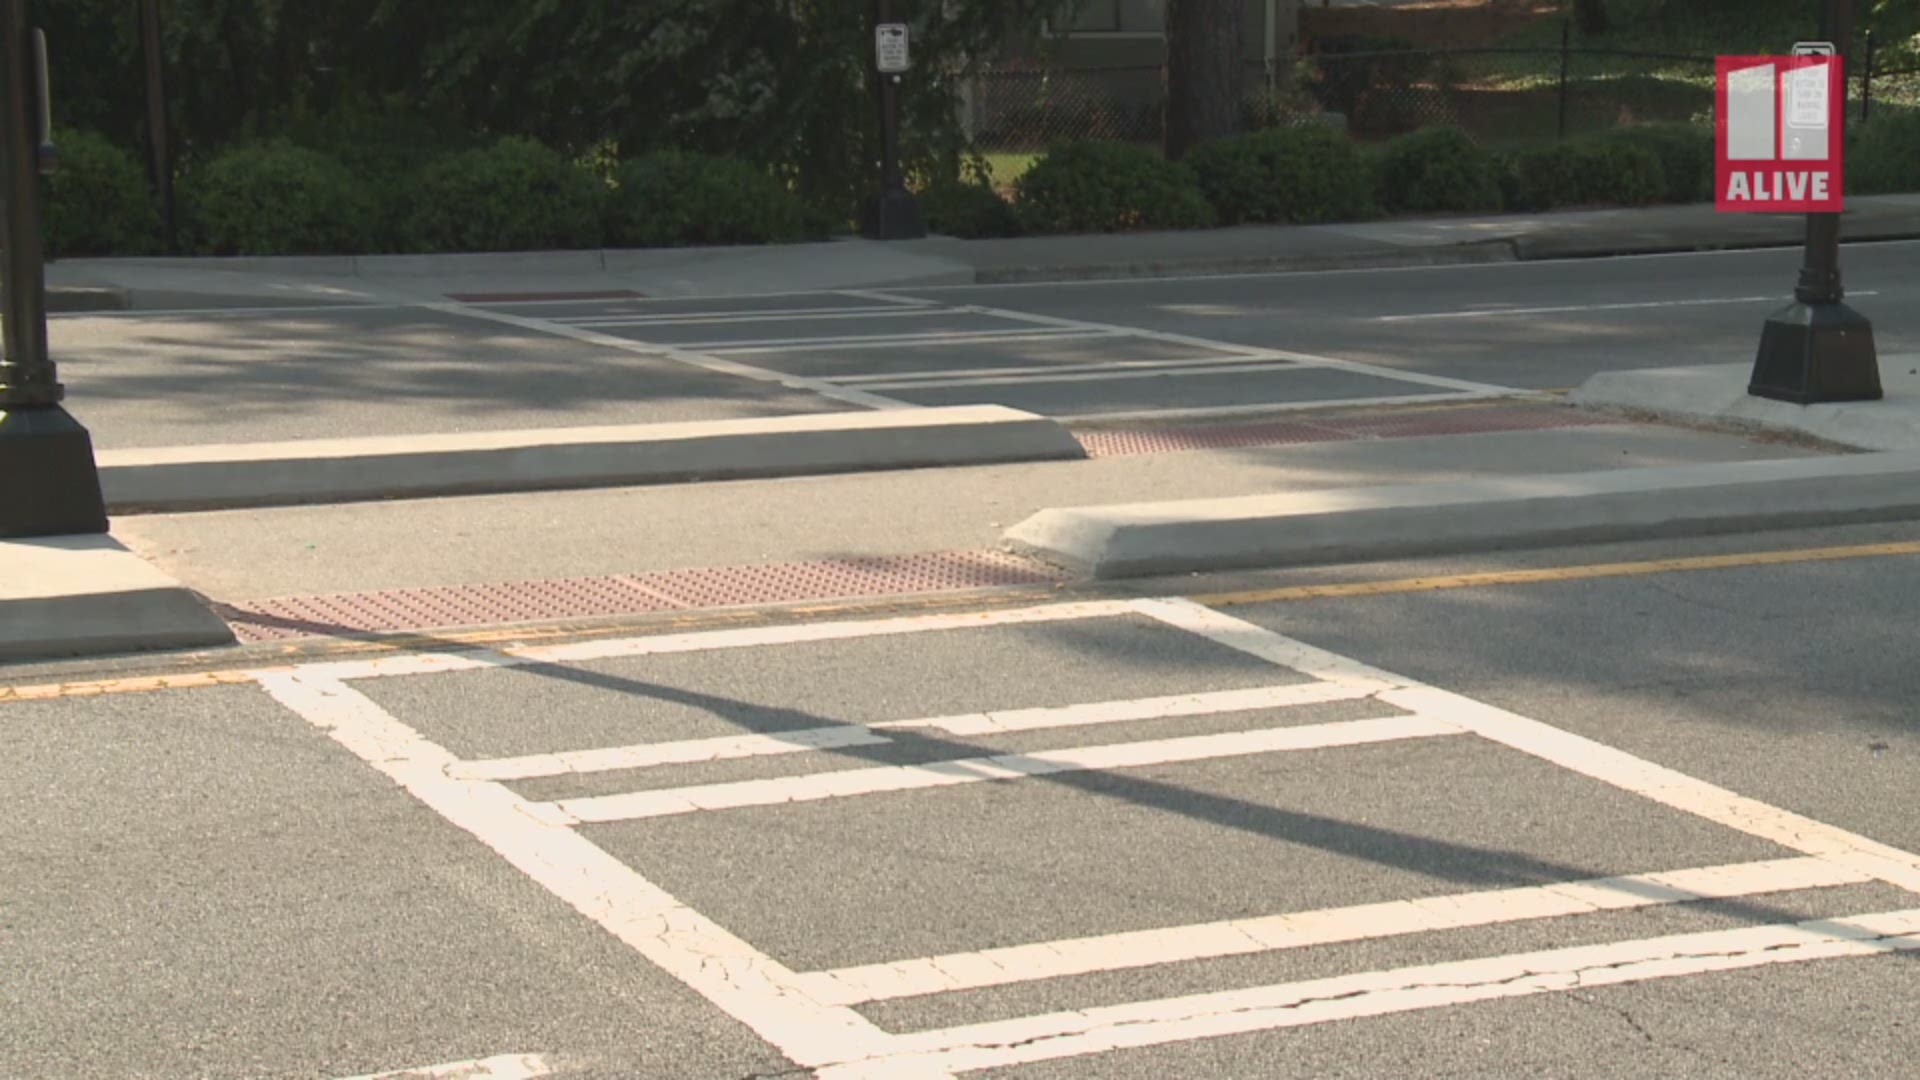 Police said a boy using a crosswalk on the way to school Tuesday morning was seriously injured when he was struck by a minivan on South Norcross Tucker Road.